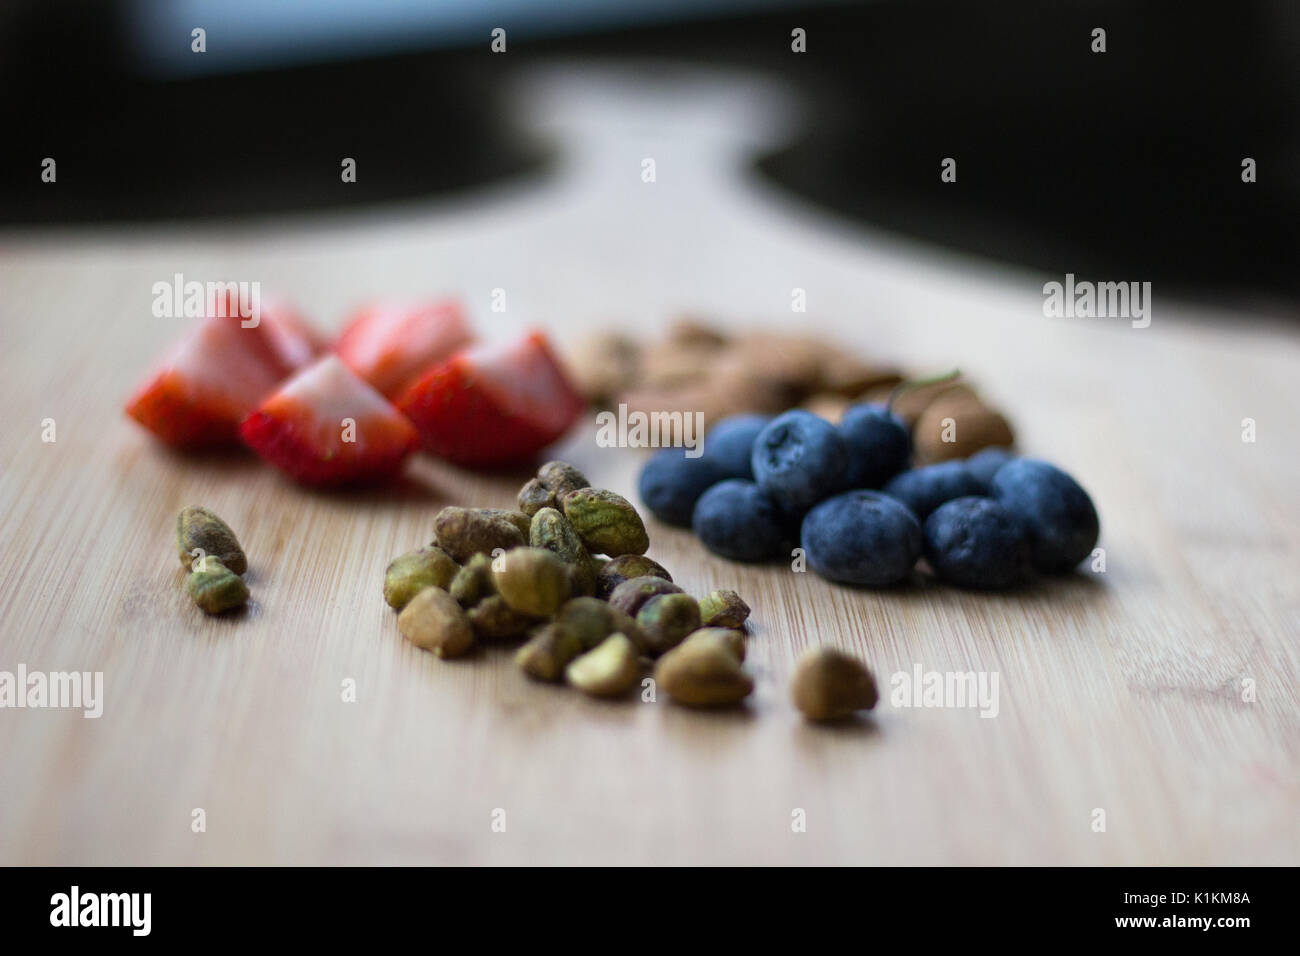 Healthy Fruit on a Wood Cutting Boards Stock Photo